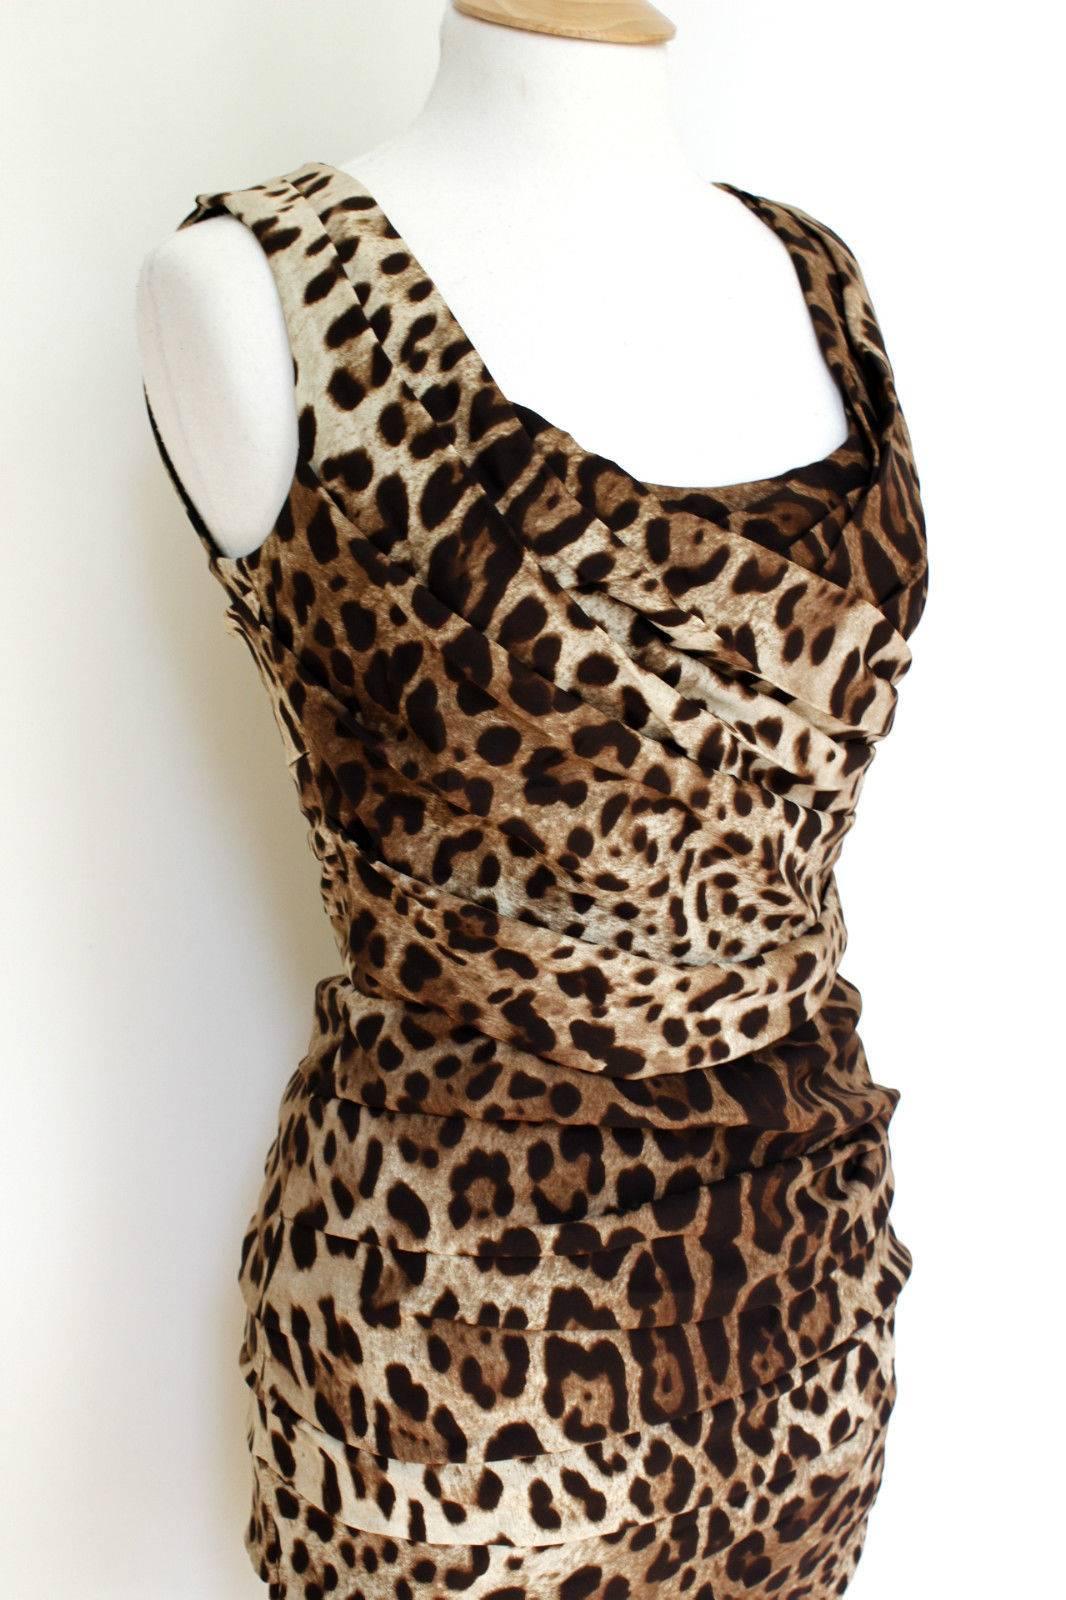 £1100 Dolce & Gabbana Leopard Print Dress 44 UK 12
Beautiful gathered leopard print silk dress
Below the knee. Fully lined. ziped at the back 
96% Silk  4% Elastane
Length 39 inches, Chest 19 inches, waist 14 inches, hips 18 inches across laid flat